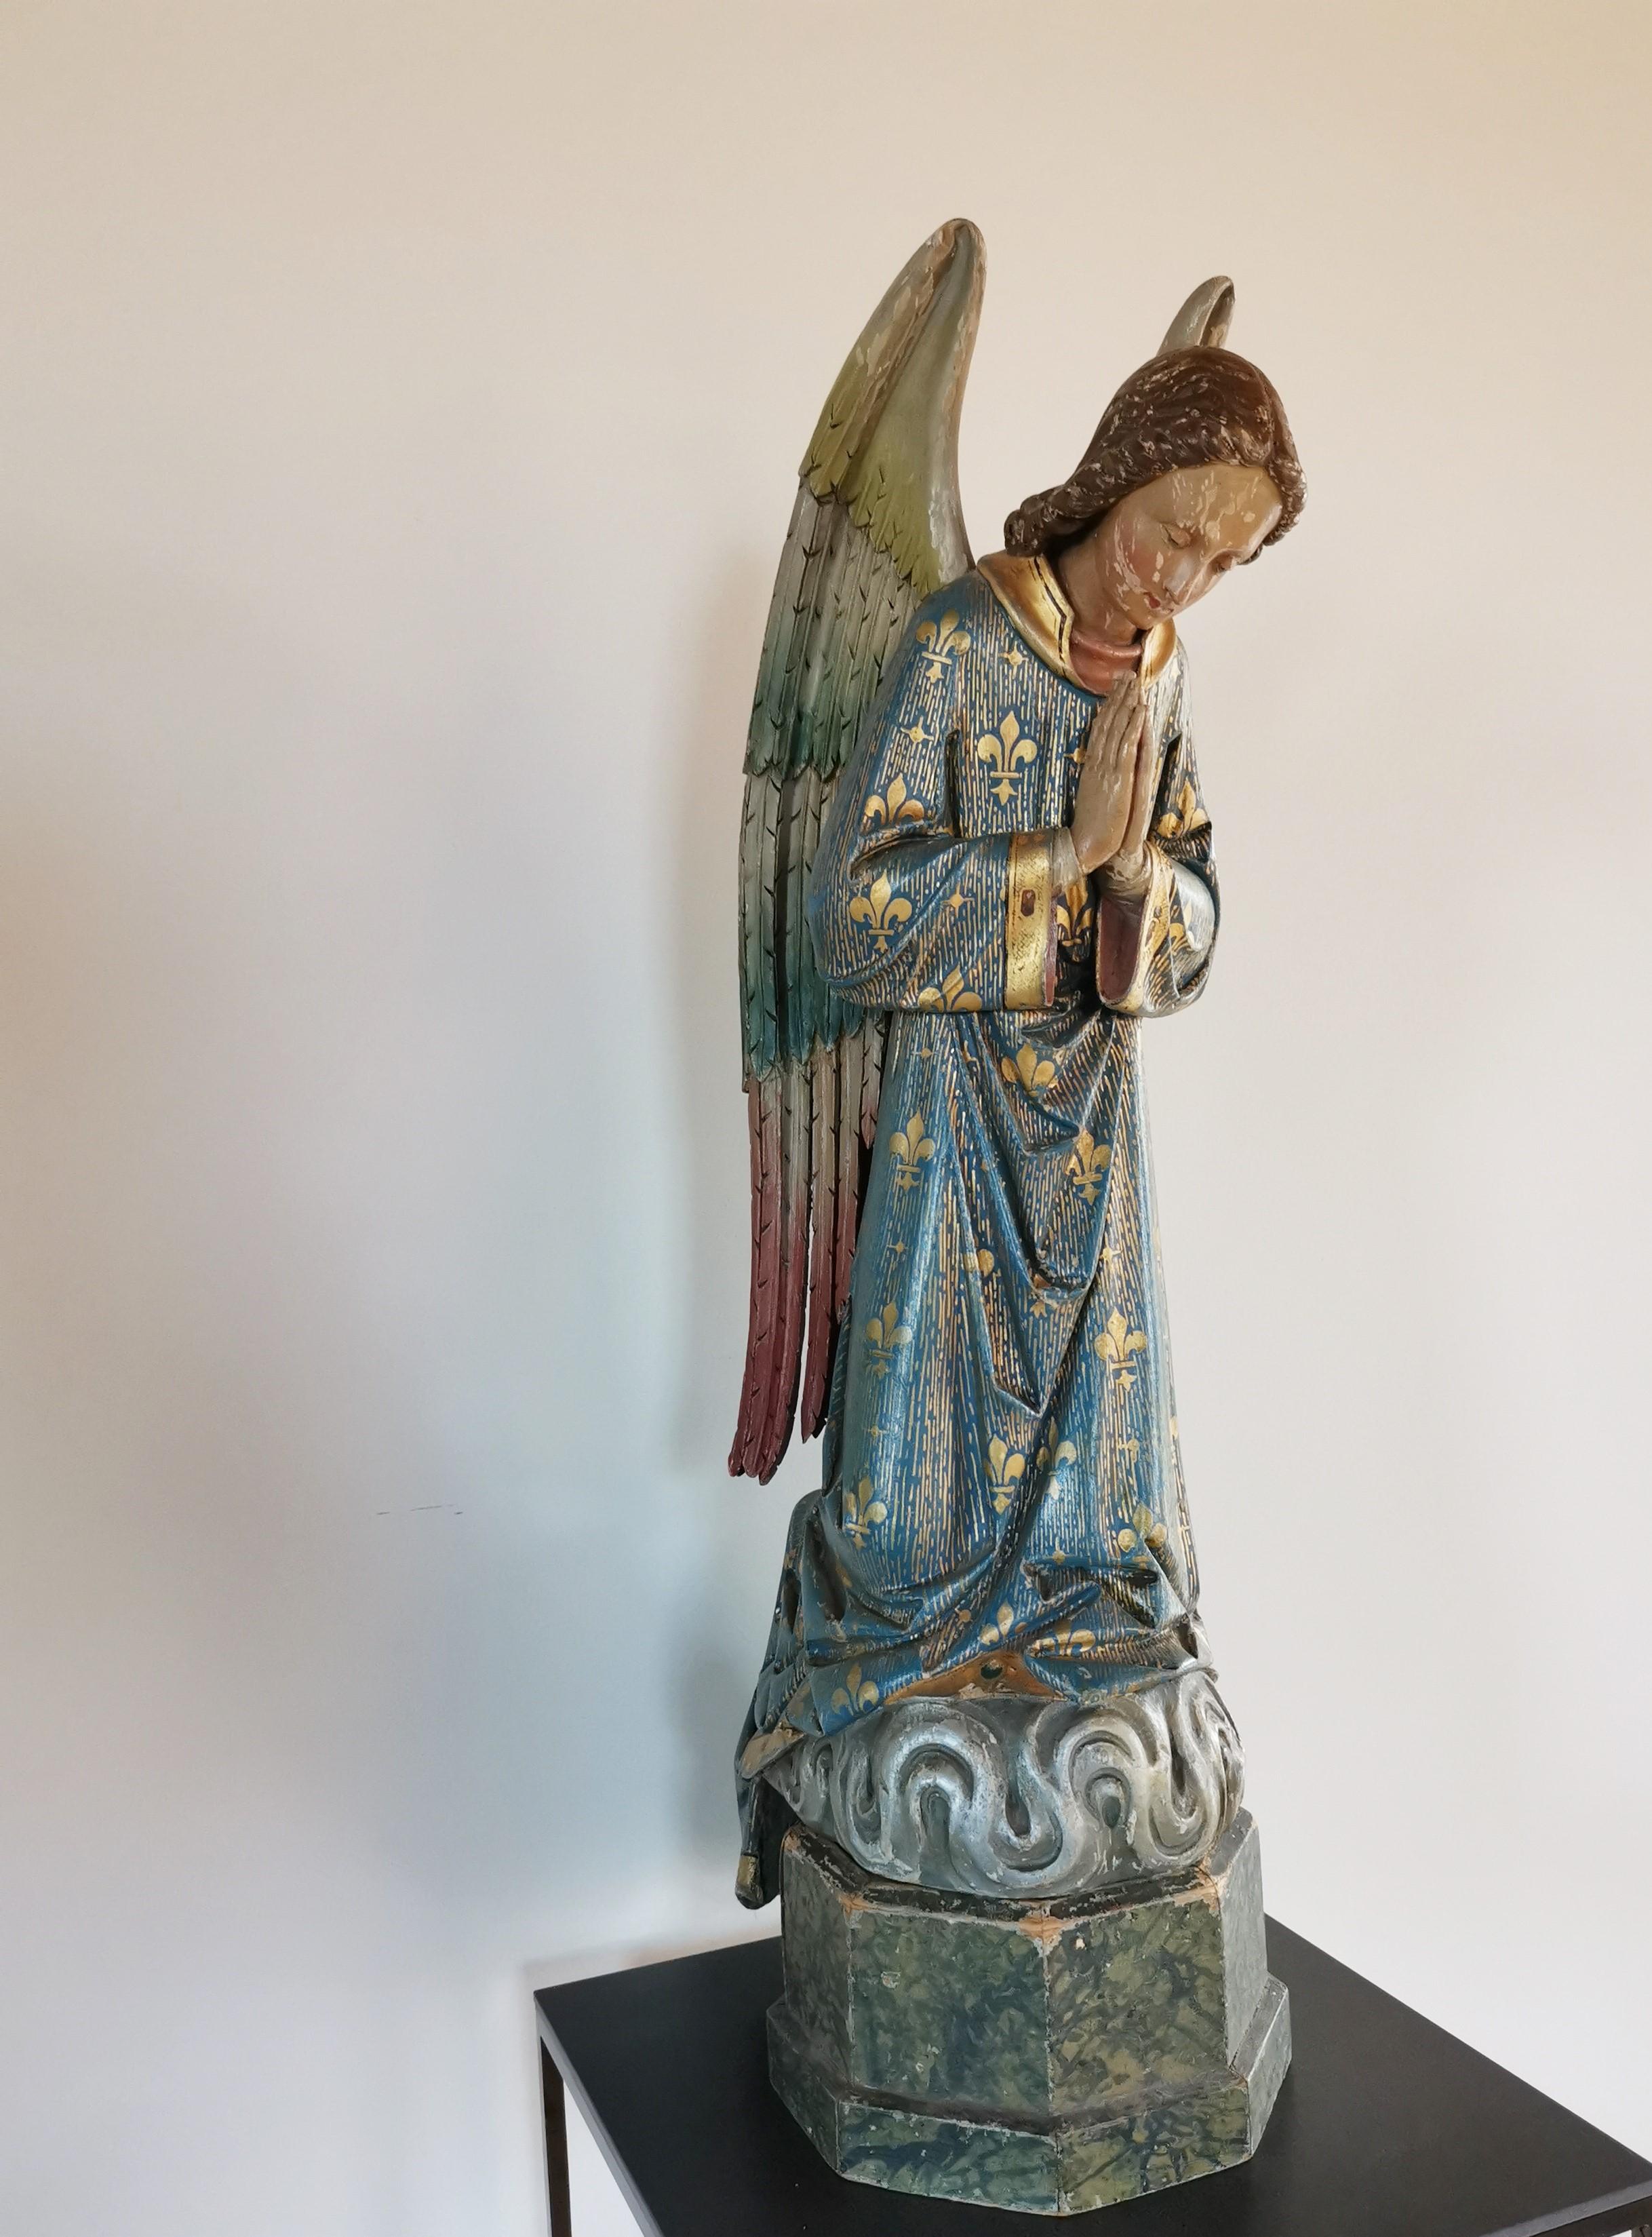 Mid 19th century French, parcel gilt and polychrome wood carved angel, coming from a convent near Ghent (Lede). Winged Gabriel kneeling on it's faux marble painted base, still in good condition with minor losses on the gilding and polychrome. The